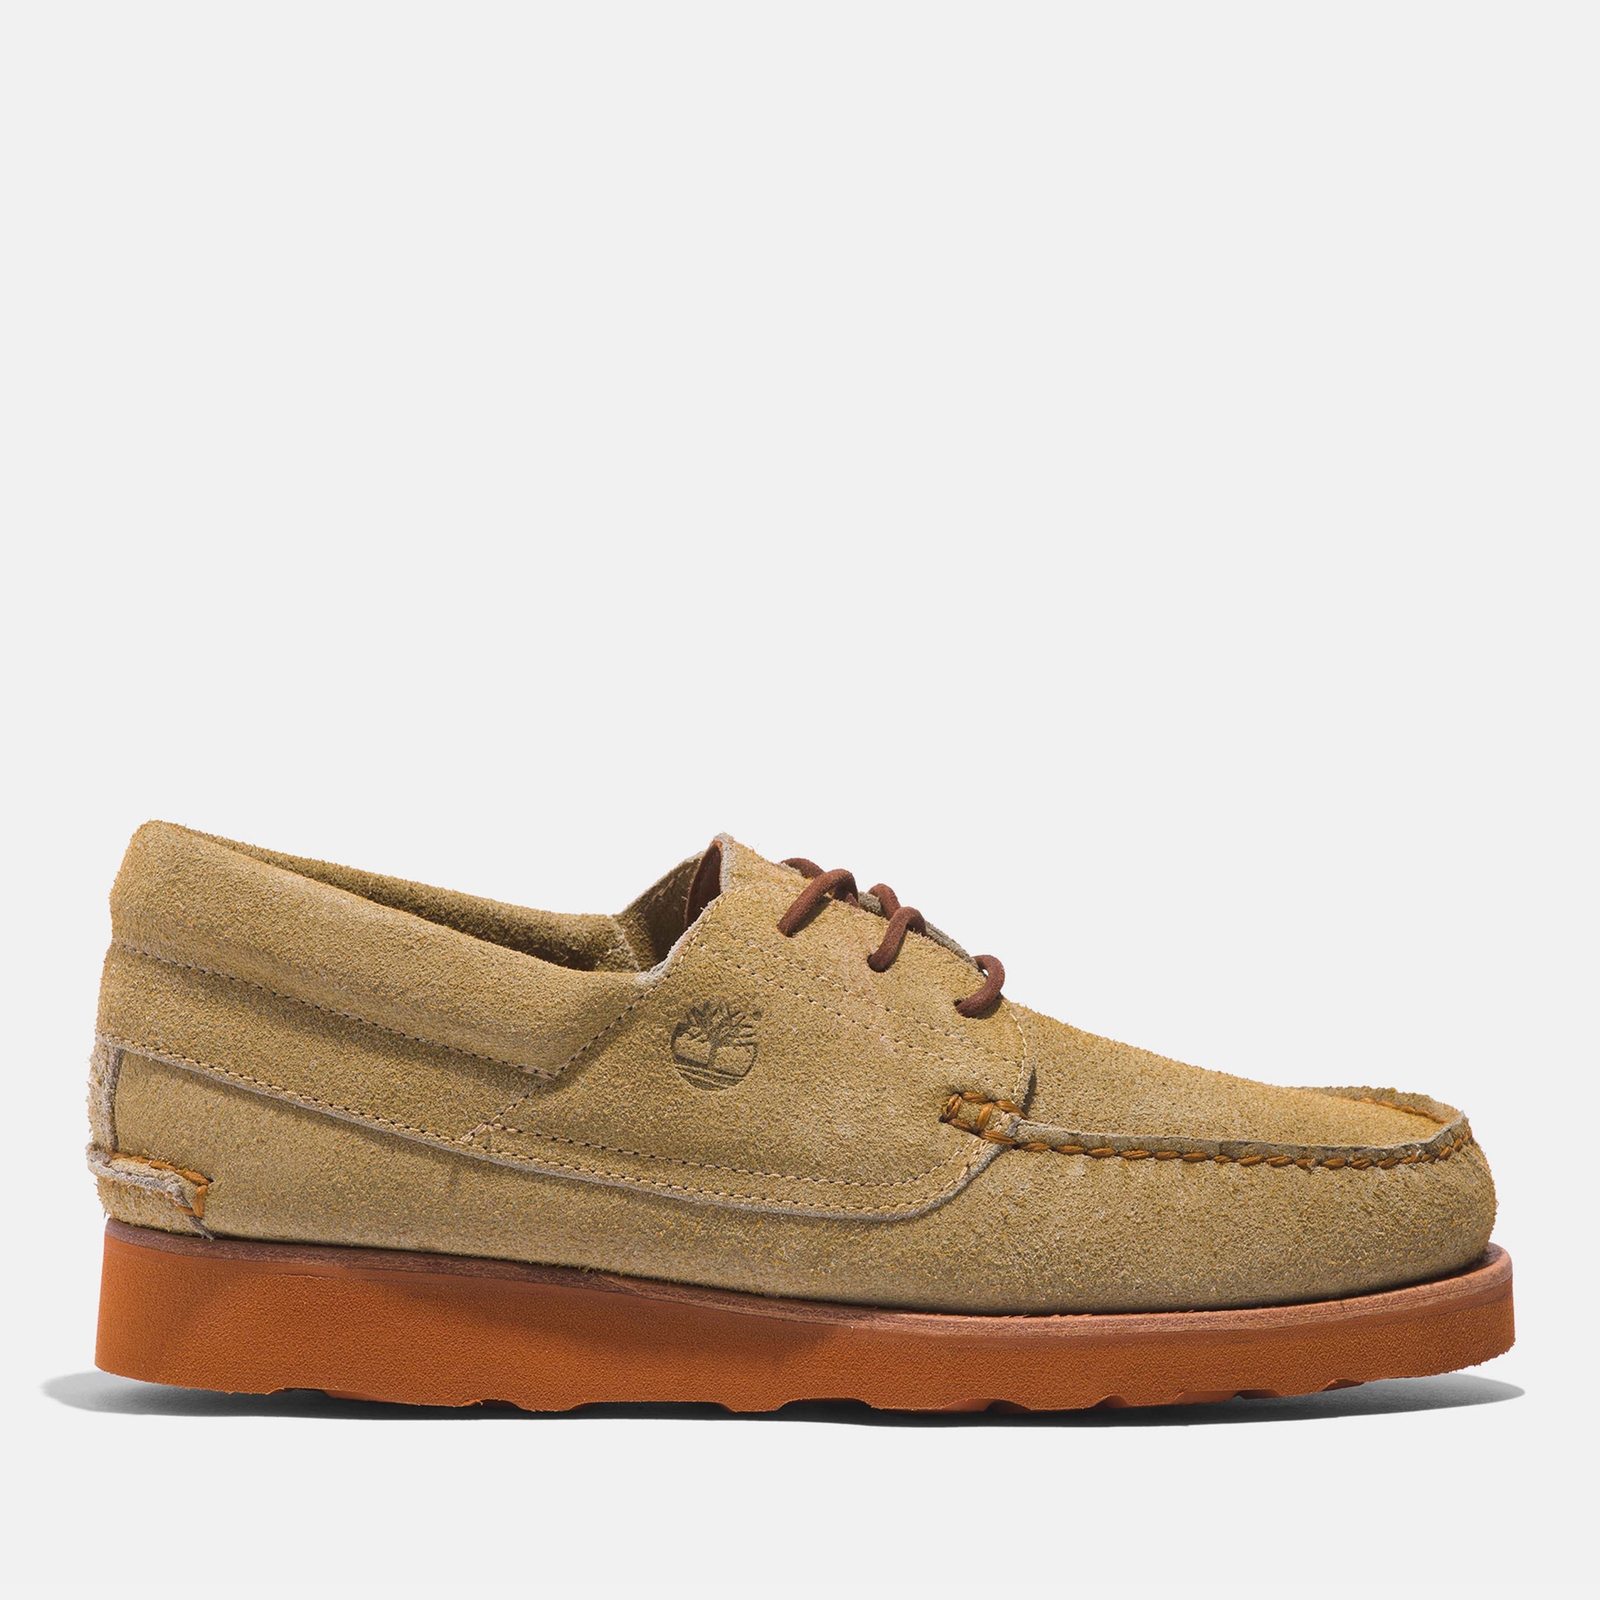 Timberland Men’s 3-Eye Suede Shoes